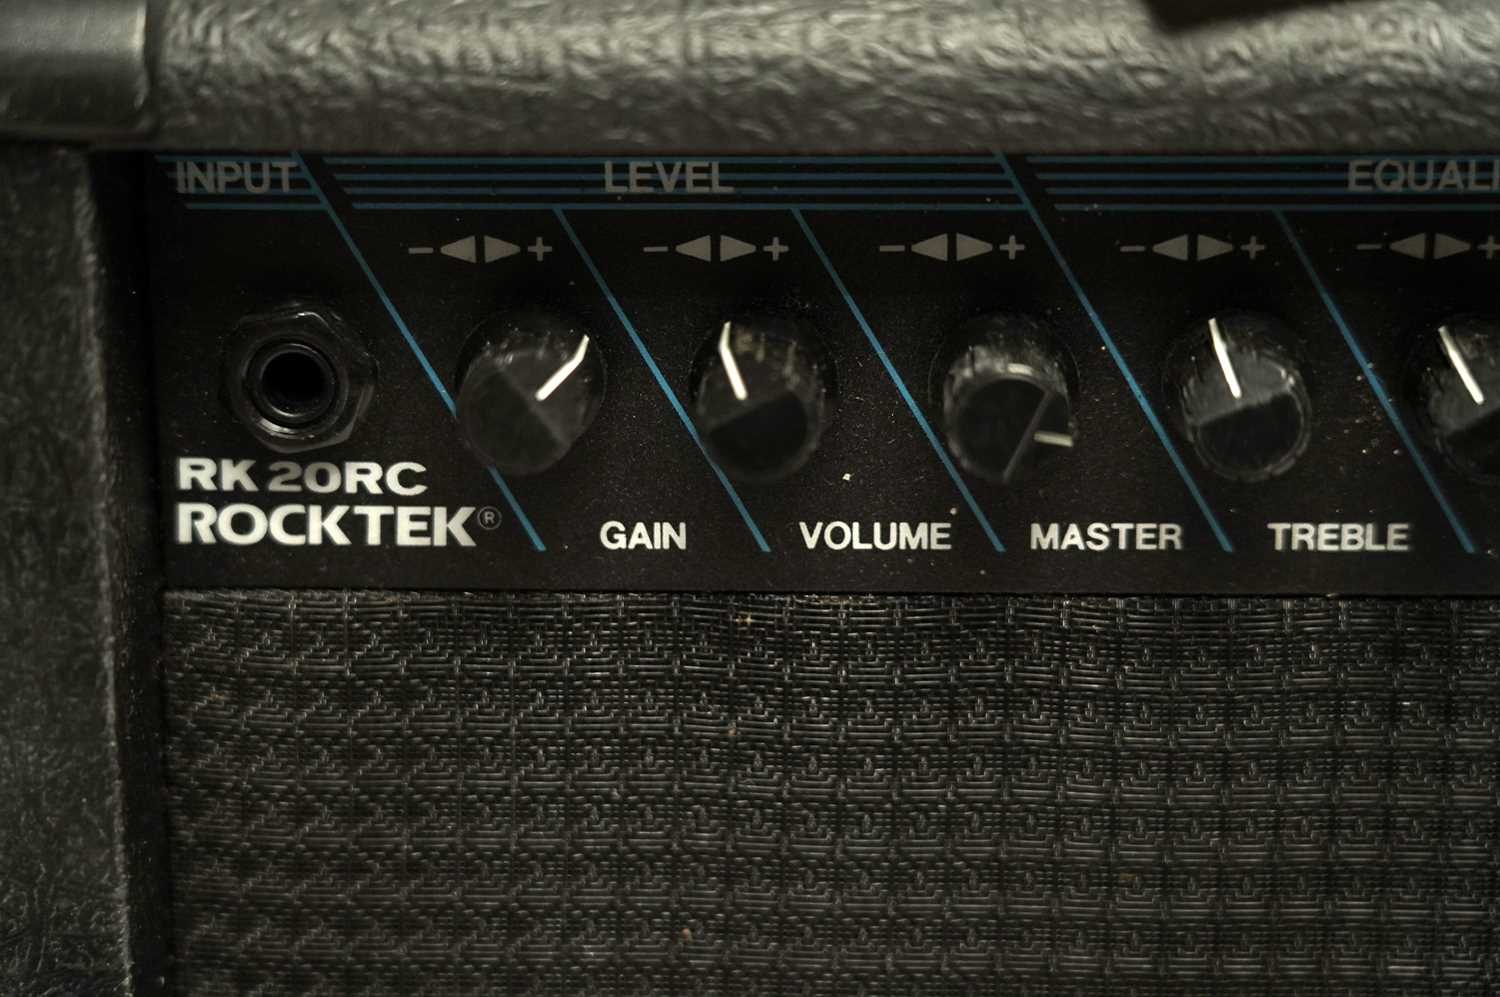 Four guitar practice amplifiers - Image 7 of 9